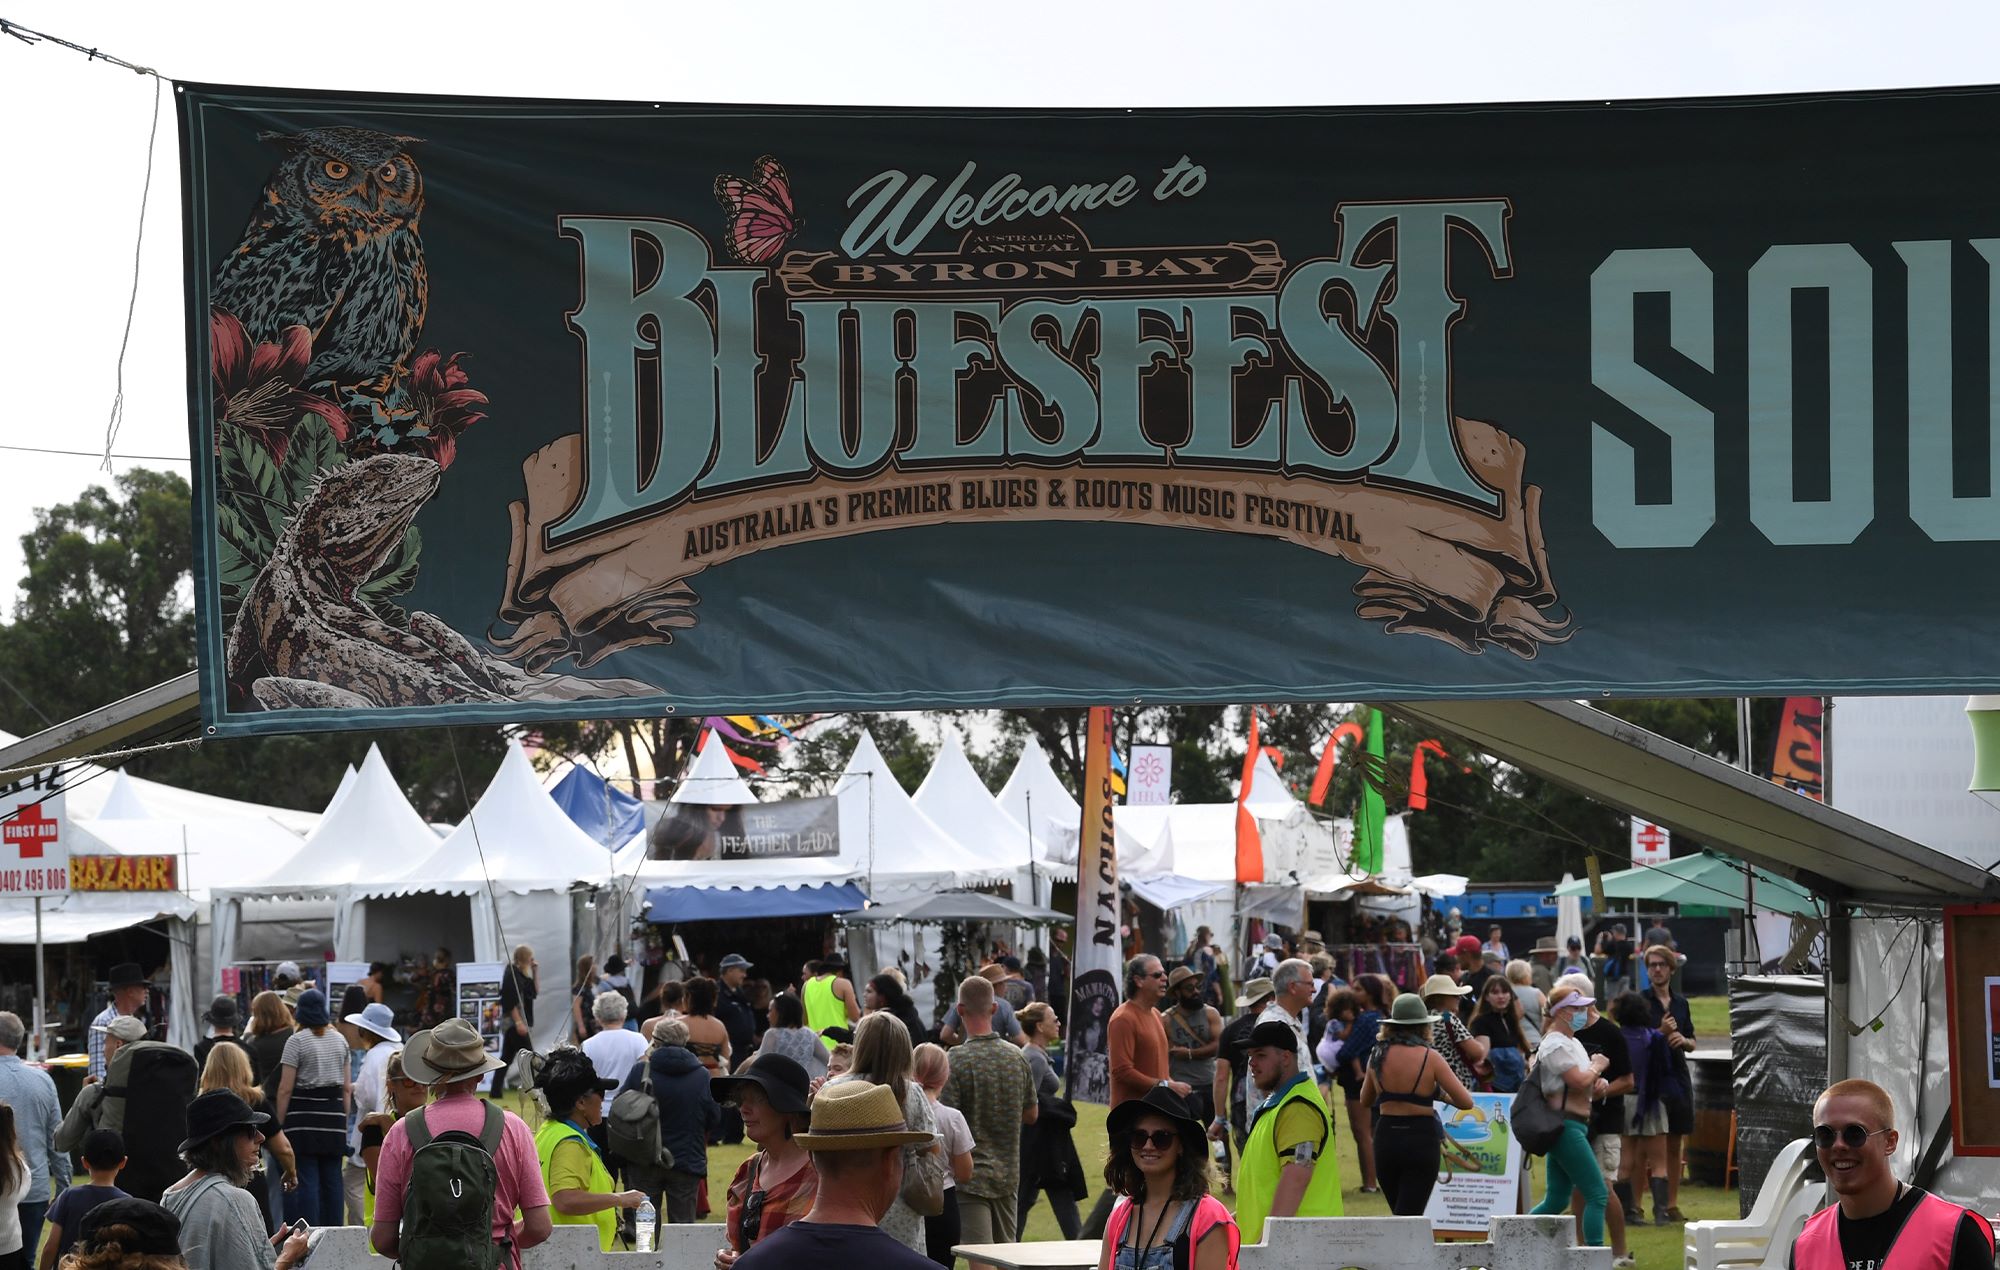 16 Facts About Byron Bay Bluesfest - Facts.net